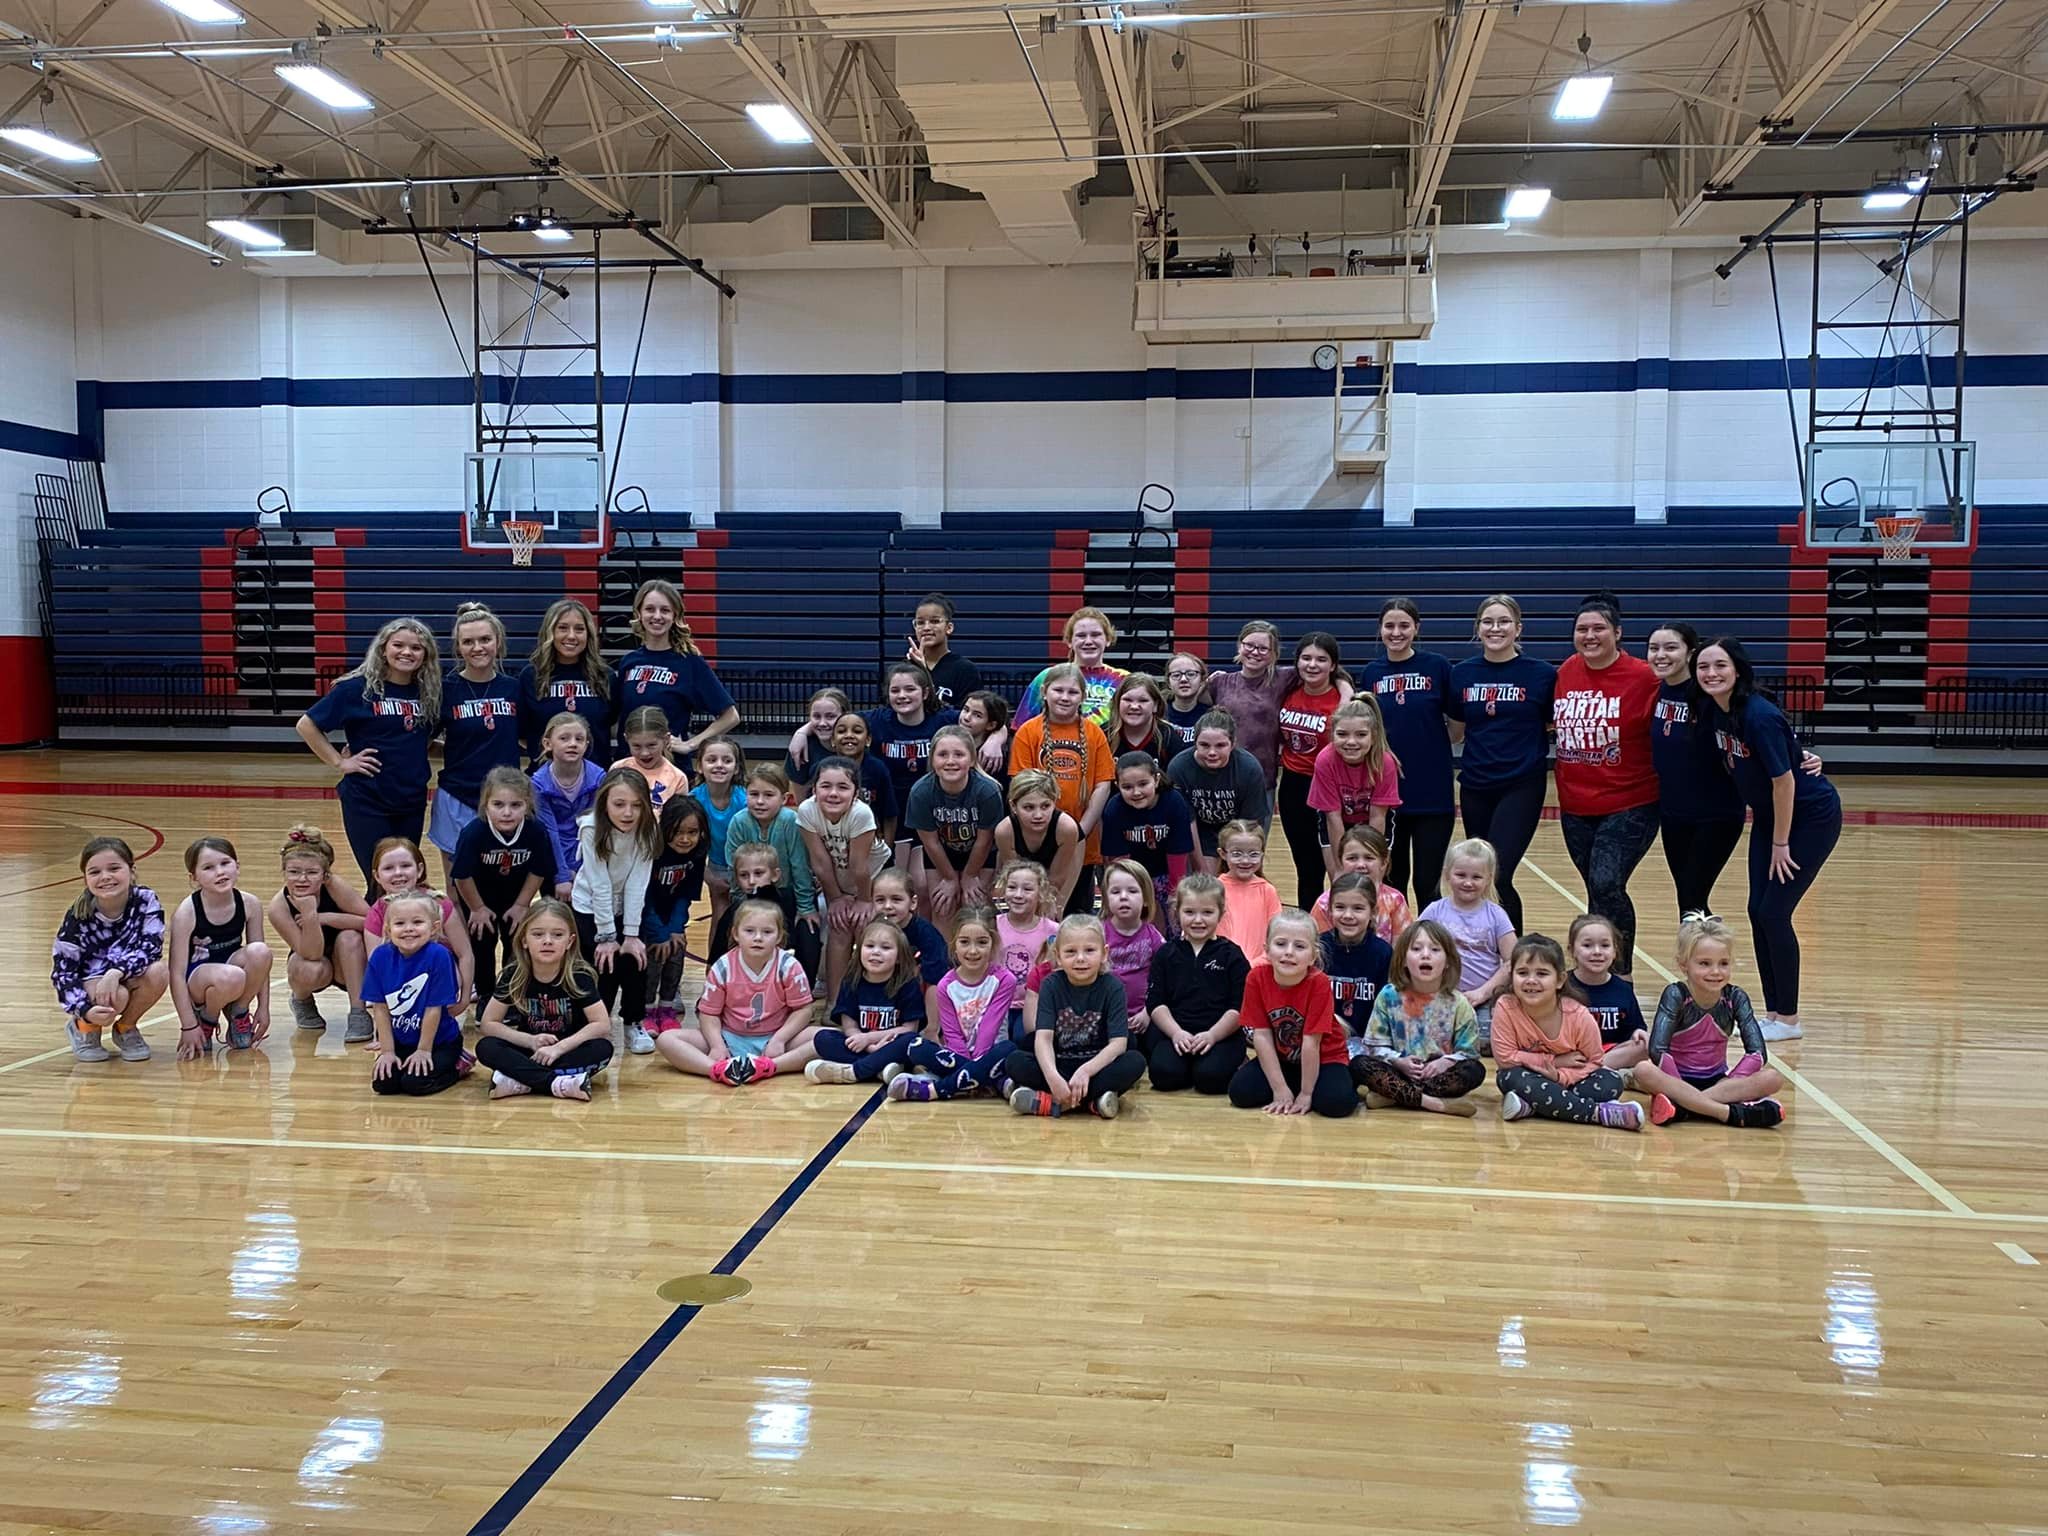 2022 Dazzlers Dance Campers with Dazzlers and Coaches